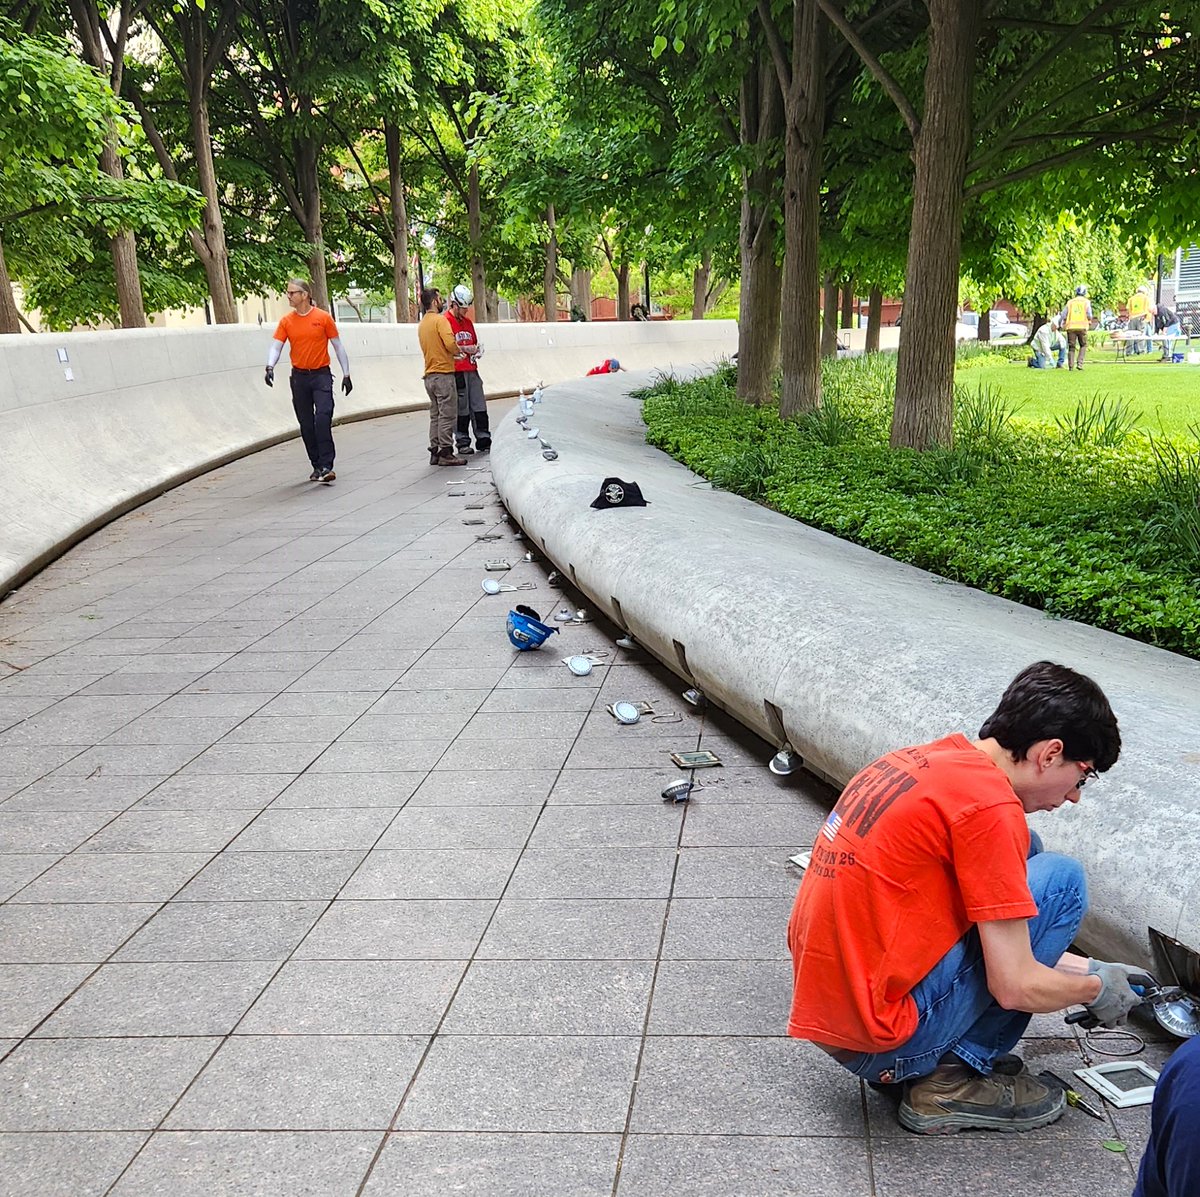 As we get ready for Police Week later in May, we were lucky to recently welcome a volunteer group from Helmets to Hardhats to replace all the lights in the National Law Enforcement Officers Memorial, ensuring that visitors can pay their respects at all hours. We are very grateful